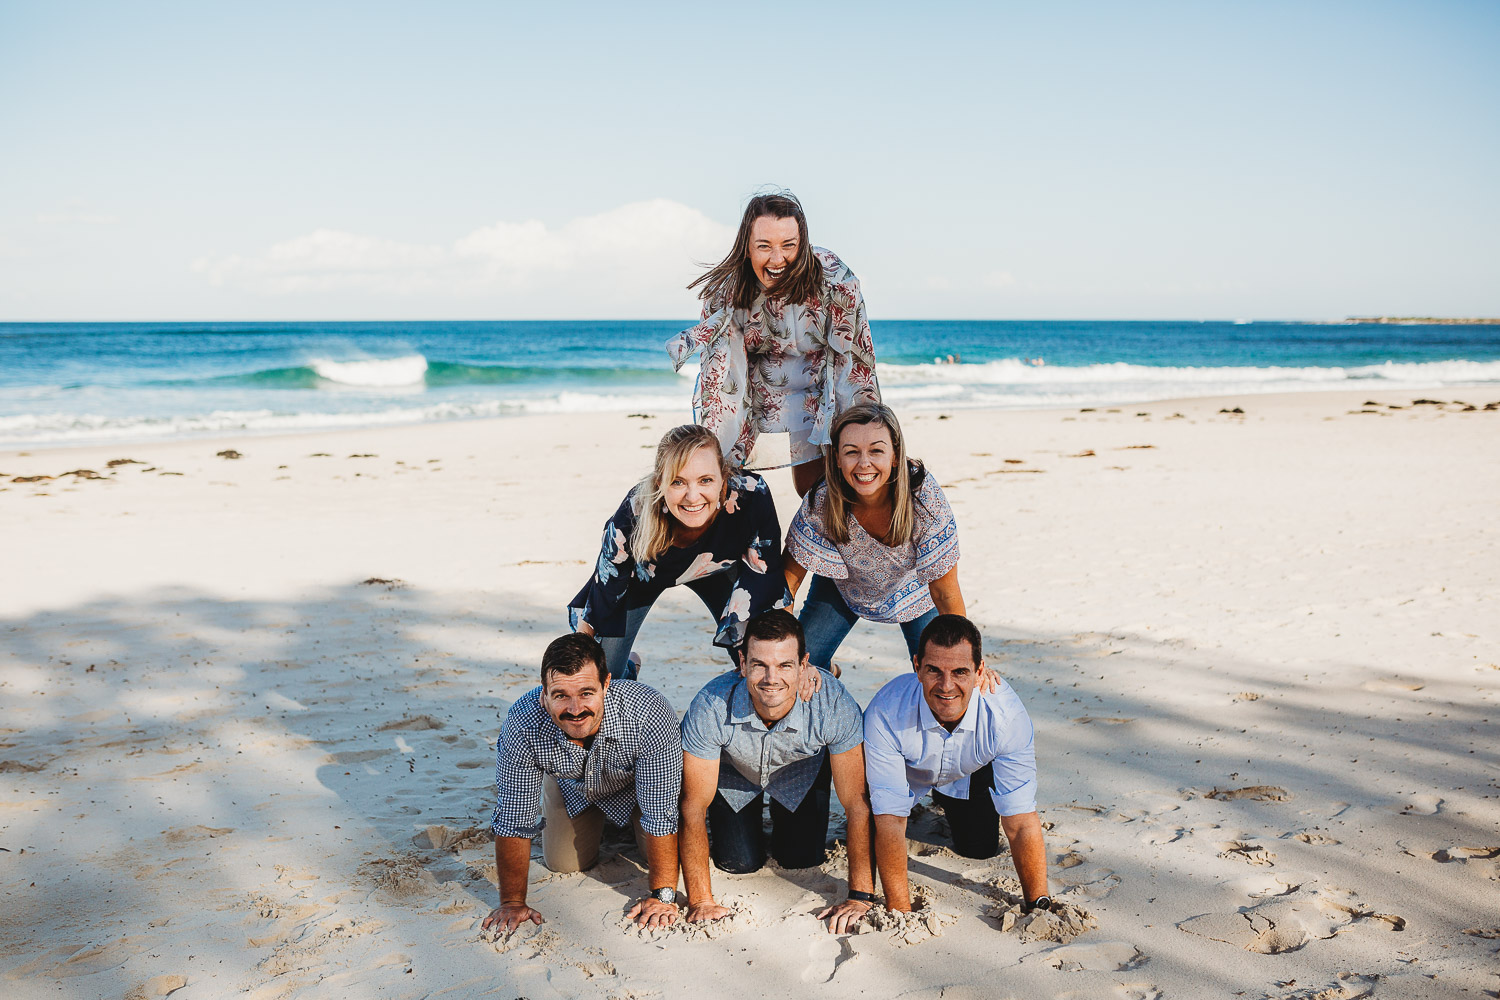 Adults in family smiling while forming human pyramid